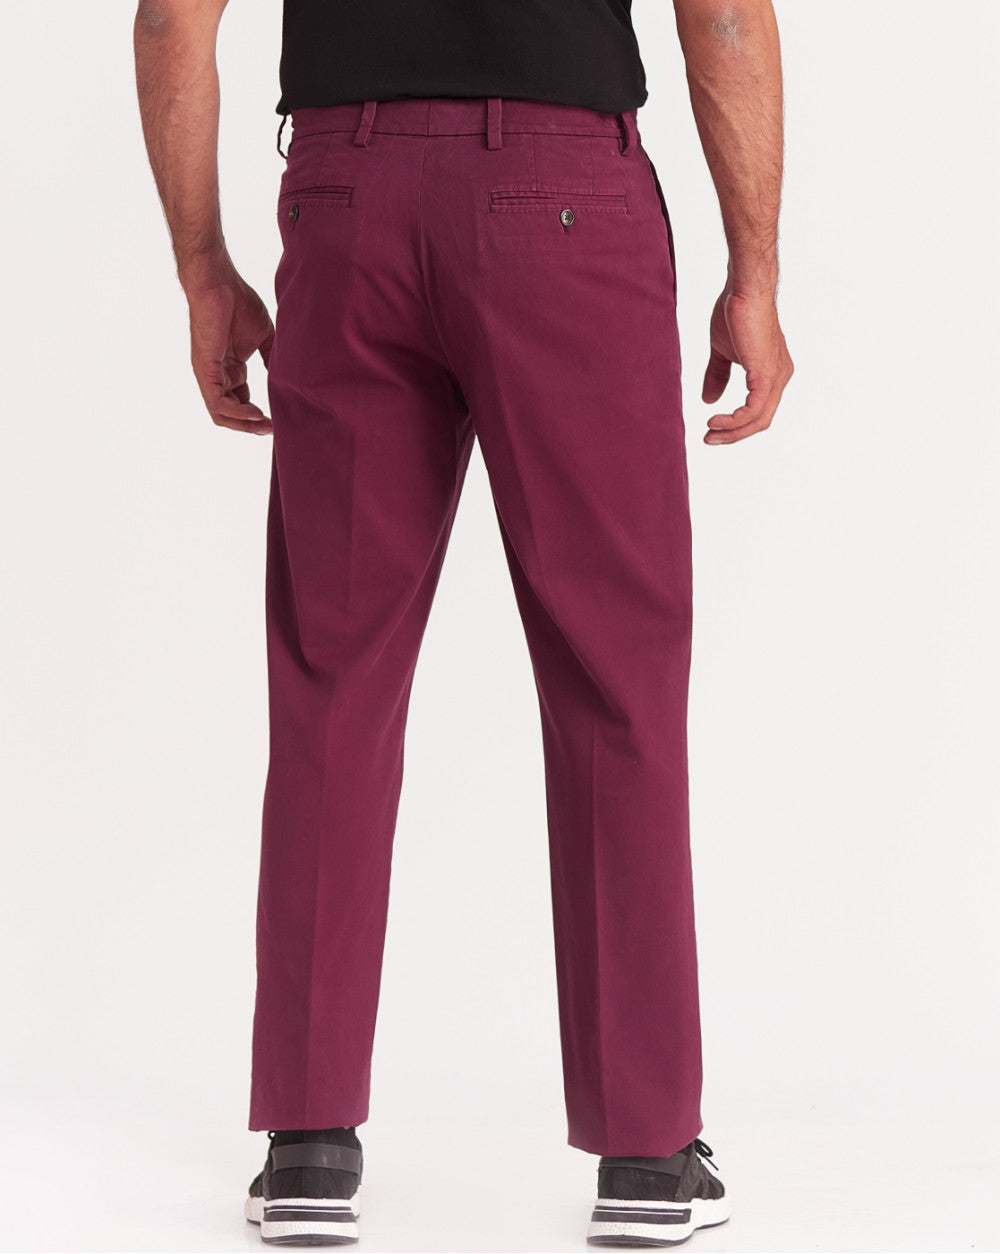 Single Pleated Relaxed Fit Garment Dyed - Maroon